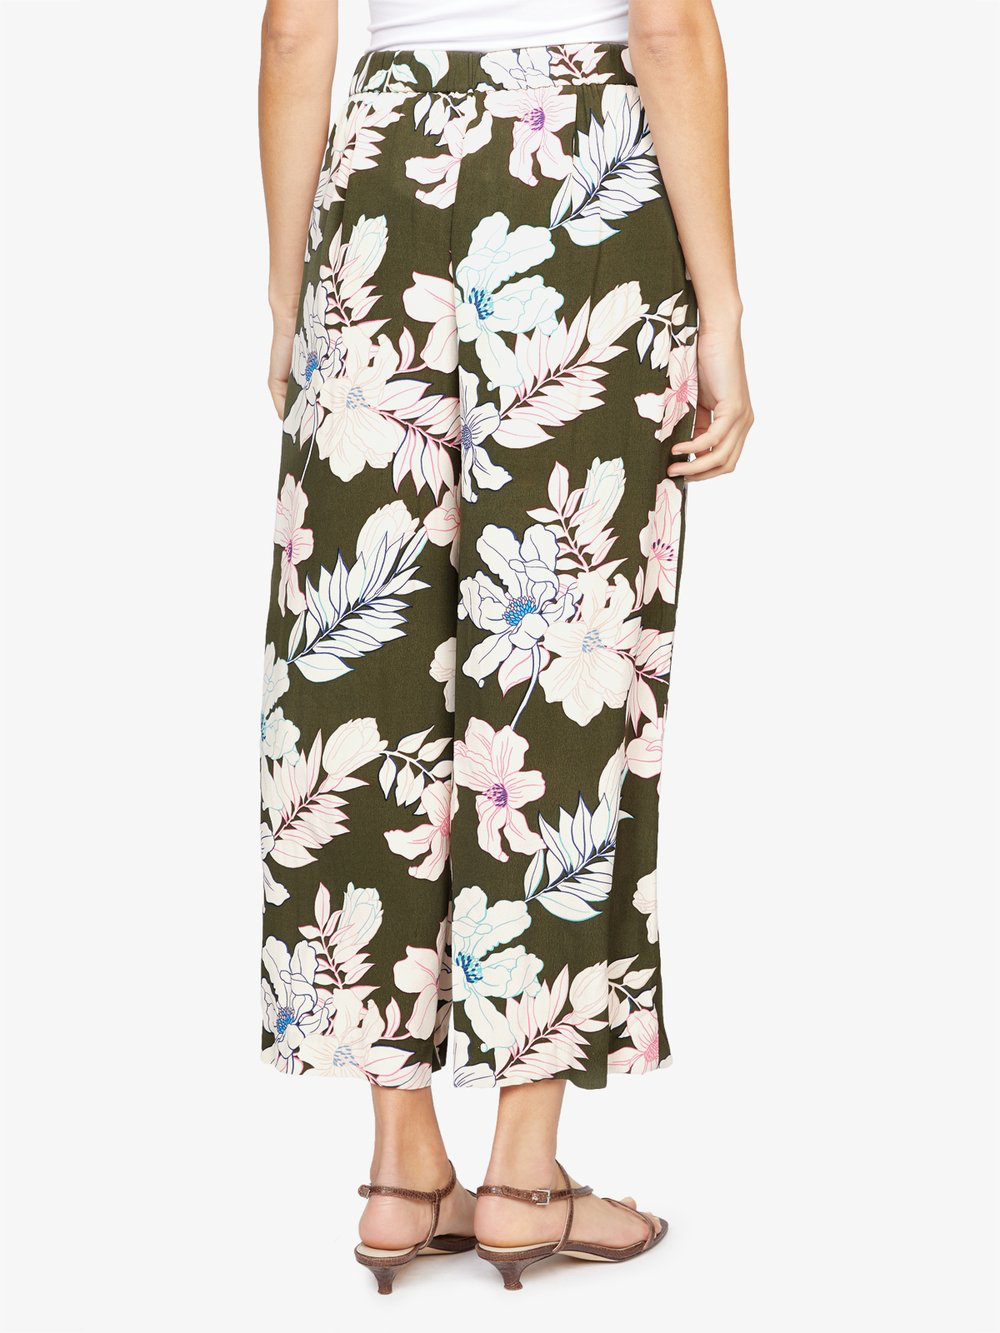 CABANA CULOTTE-TROPIC PUNCH - Kingfisher Road - Online Boutique